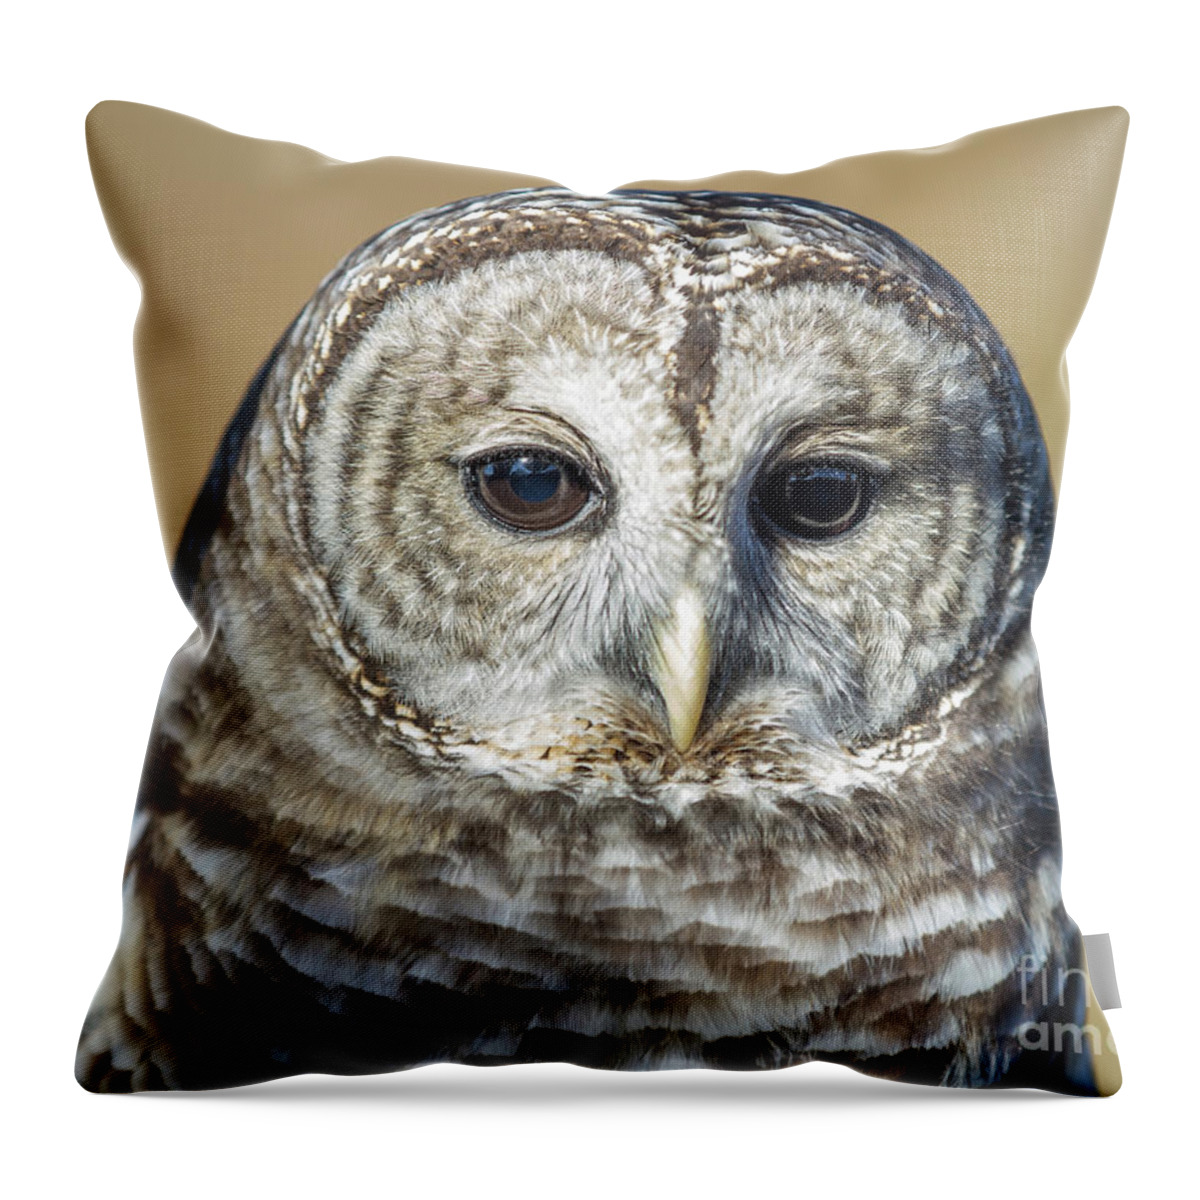 Barred Owl Throw Pillow featuring the photograph Big Brown Eyes by Chris Scroggins